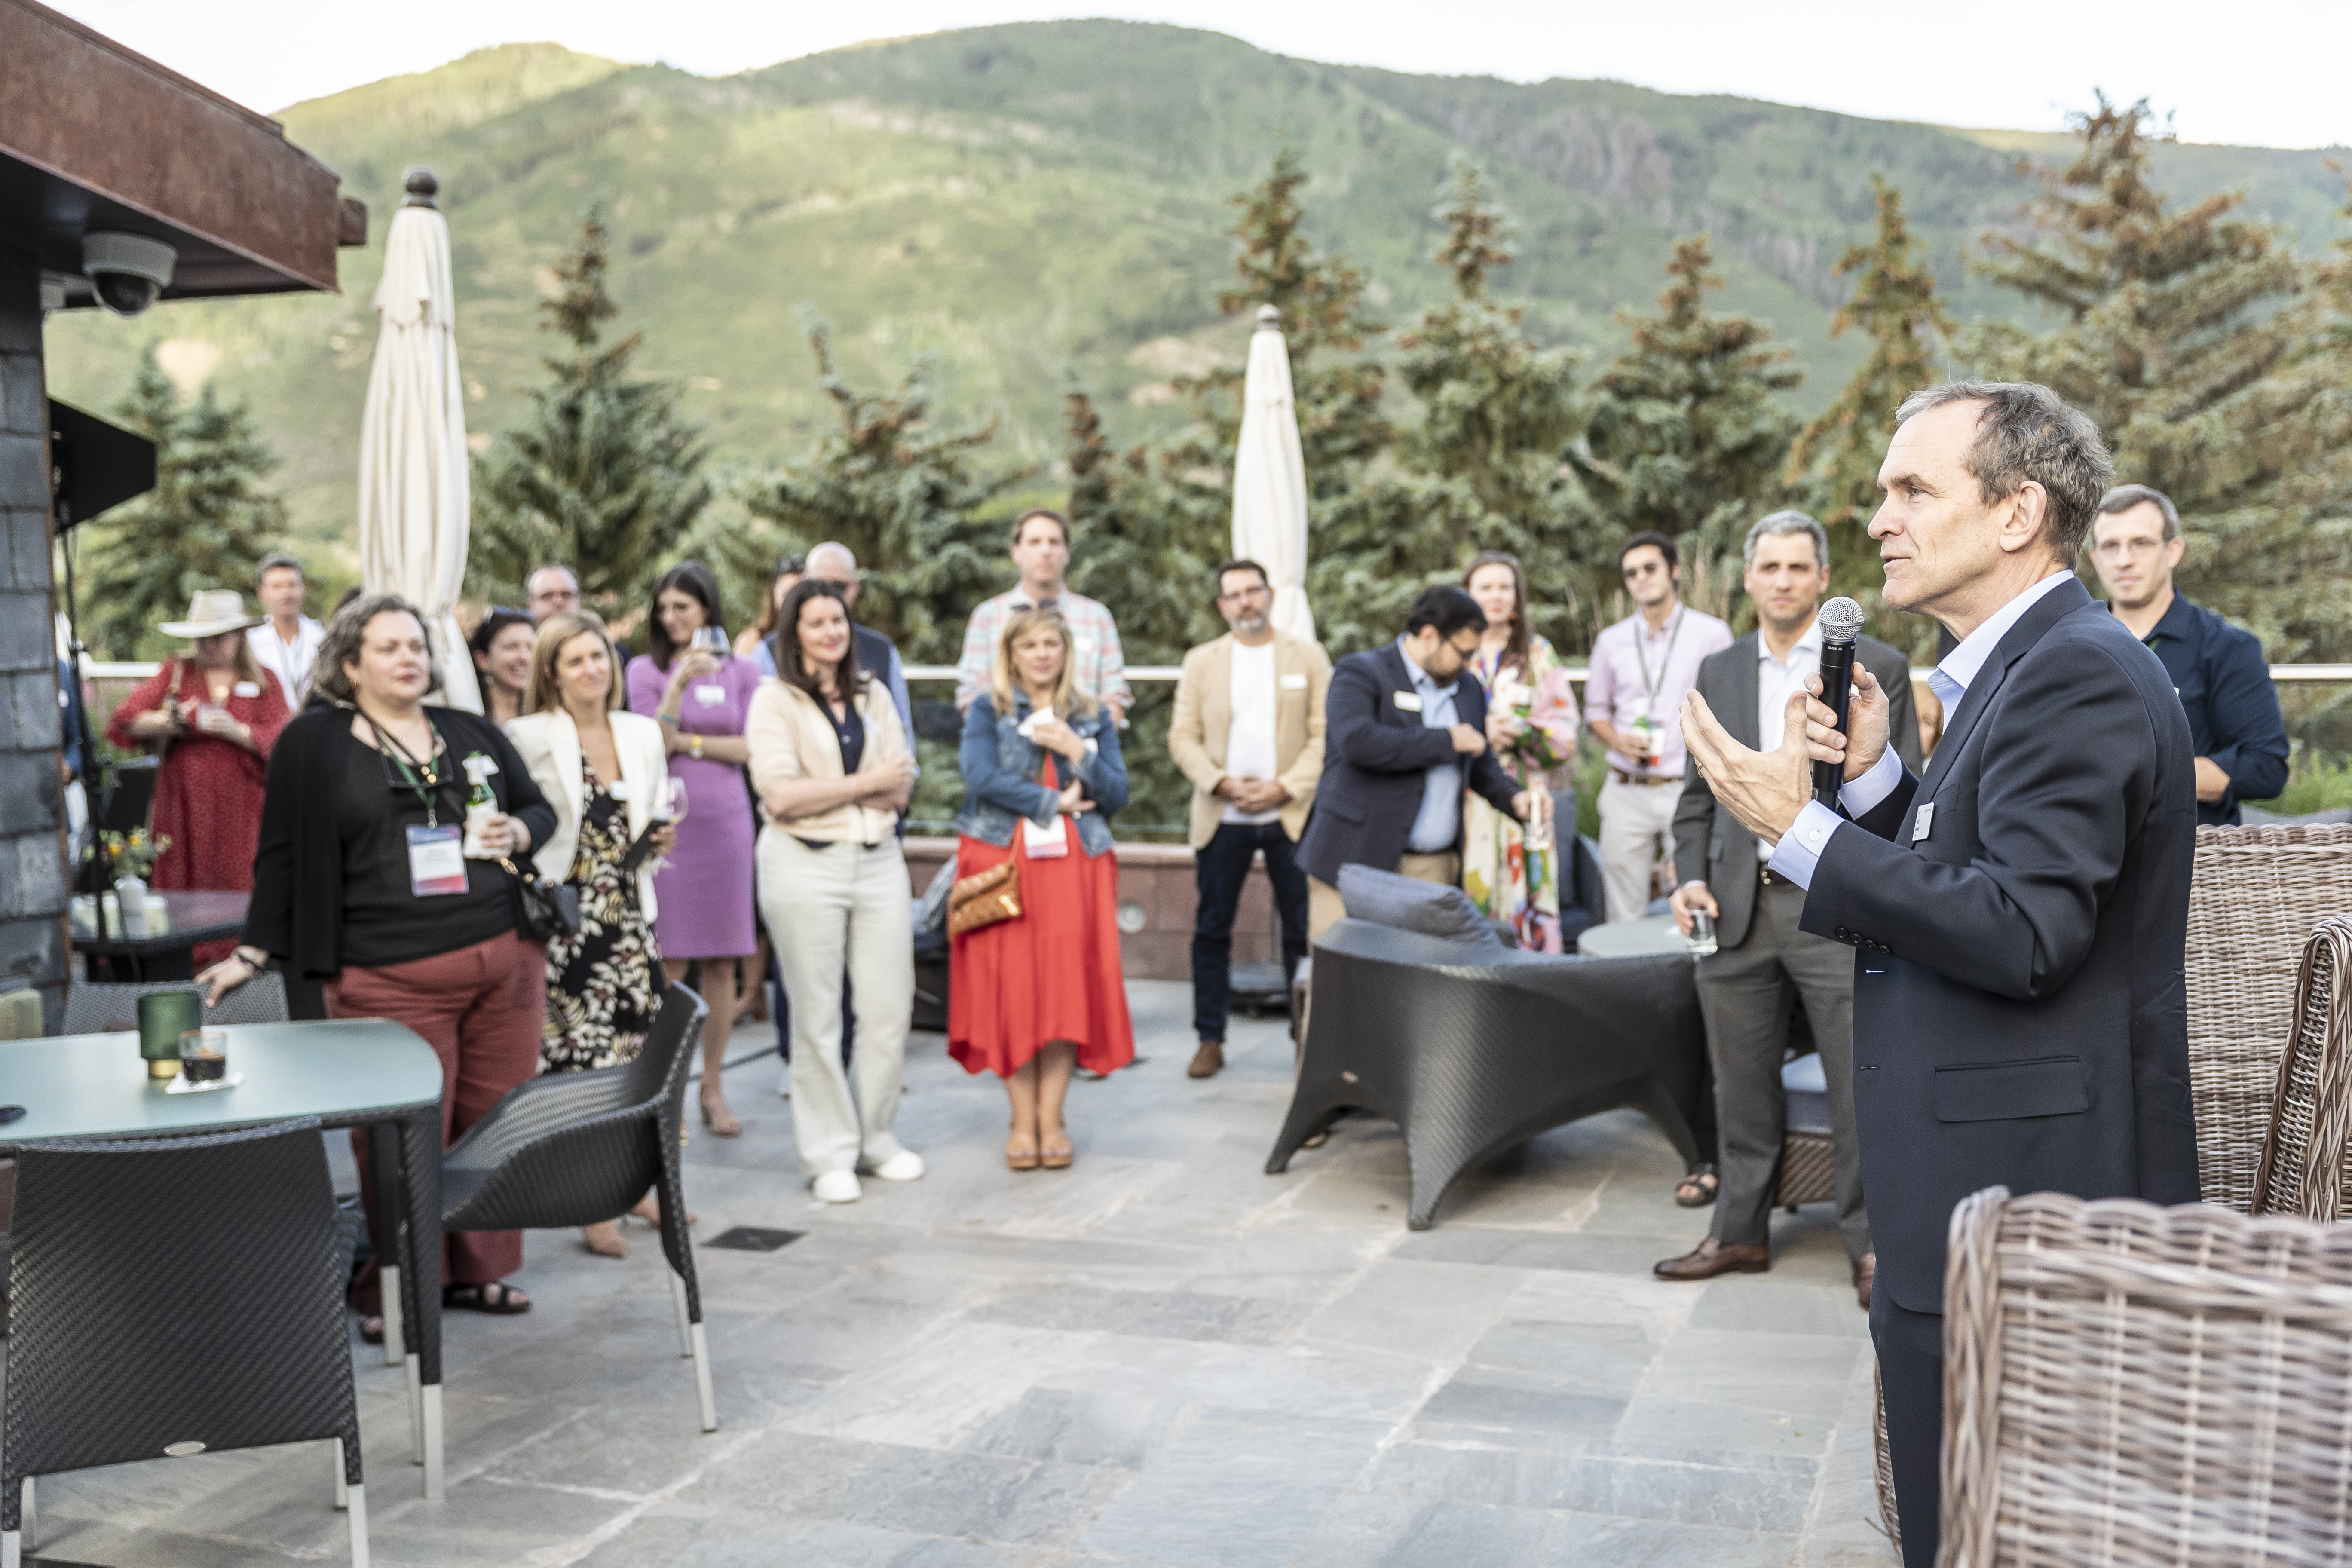 Six photos of people interacting at different events at the Aspen Security Forum such as panels, breakfast, and cocktail hour.